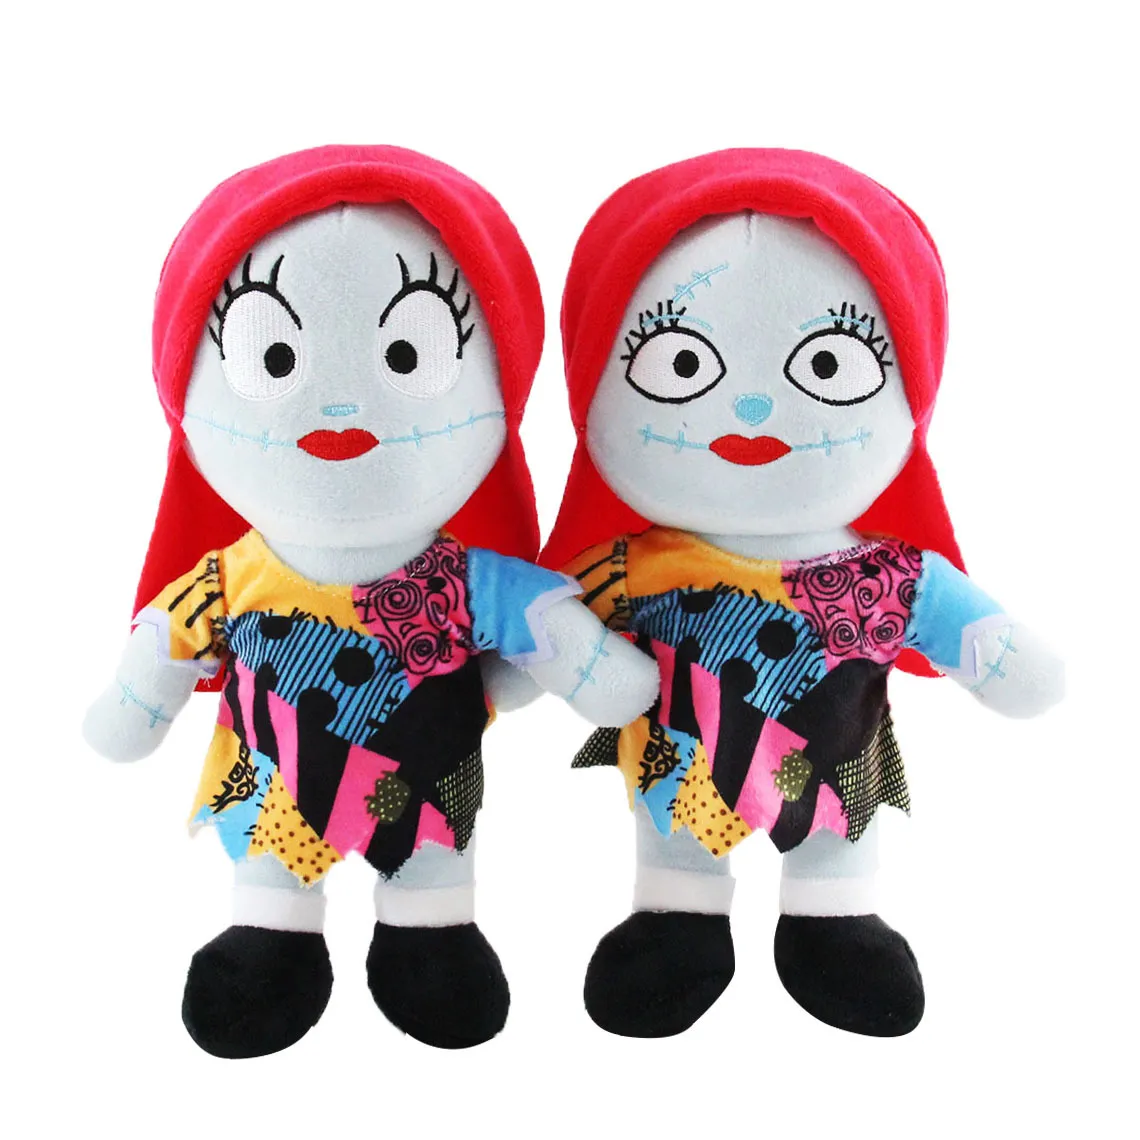 Jeffy Hand Puppet 60cm Soft Jeffy Plush Doll For Kids, Talk Show, Party  Props, Christmas Gift 230707 From Yujia08, $13.45